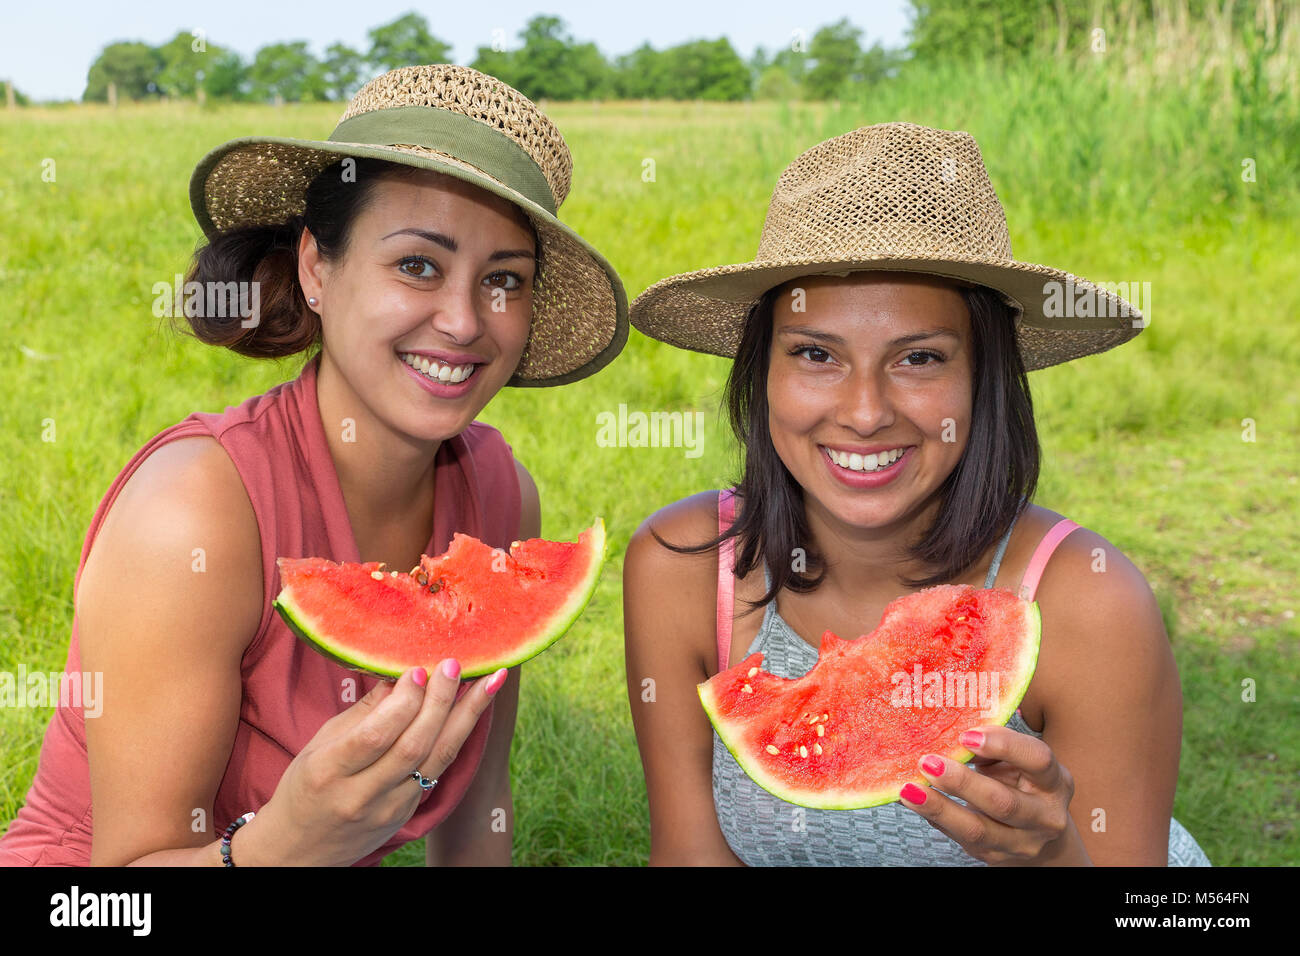 Two women eating fresh melon in nature Stock Photo